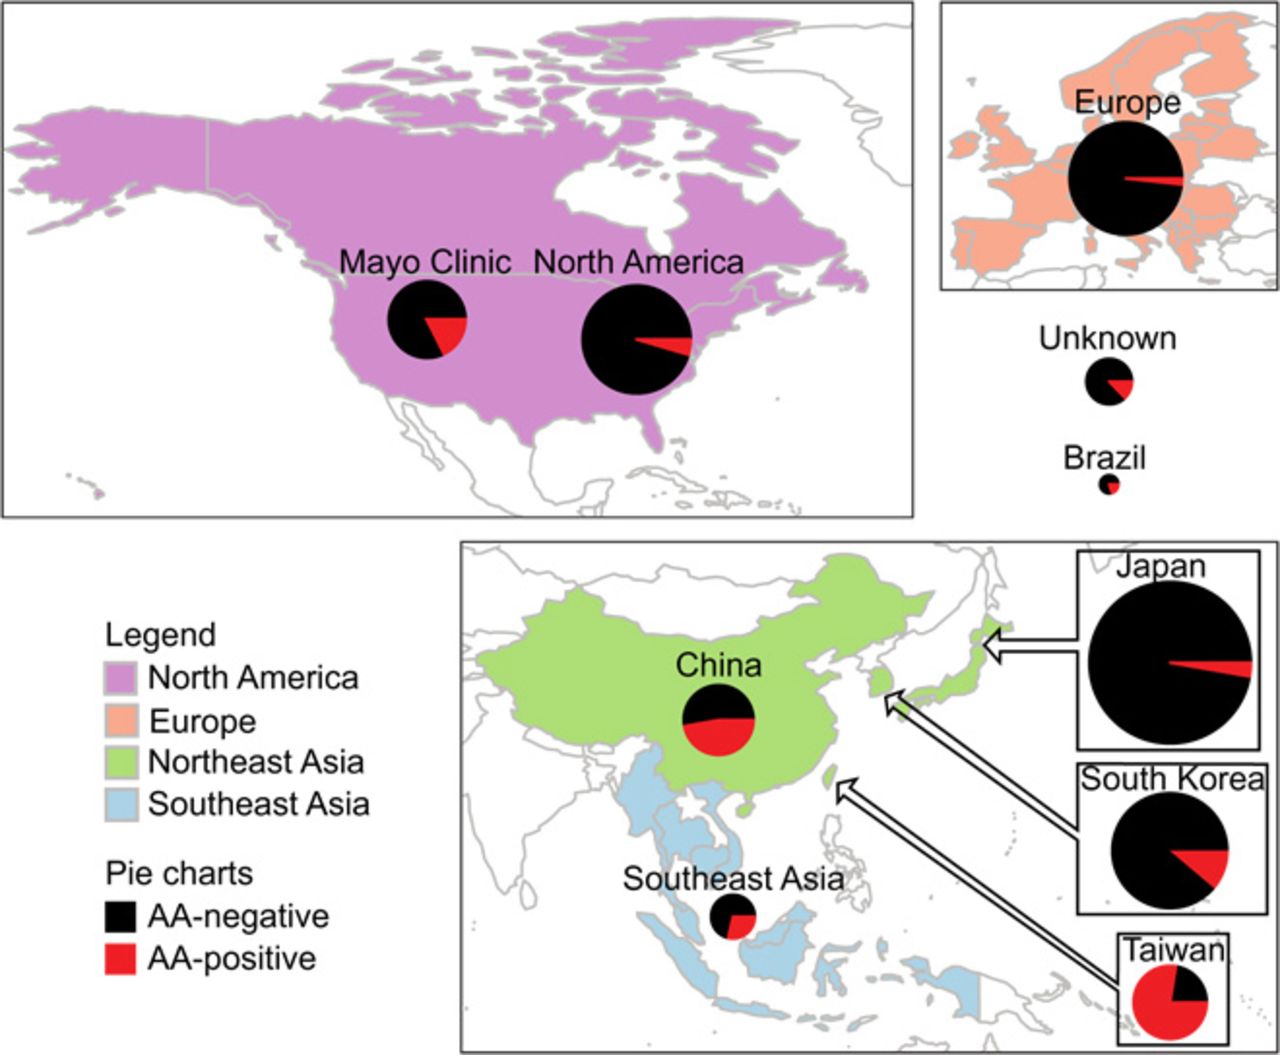 Global distribution of mutagenesis associated with aristolochic acid and derivatives in liver cancer.